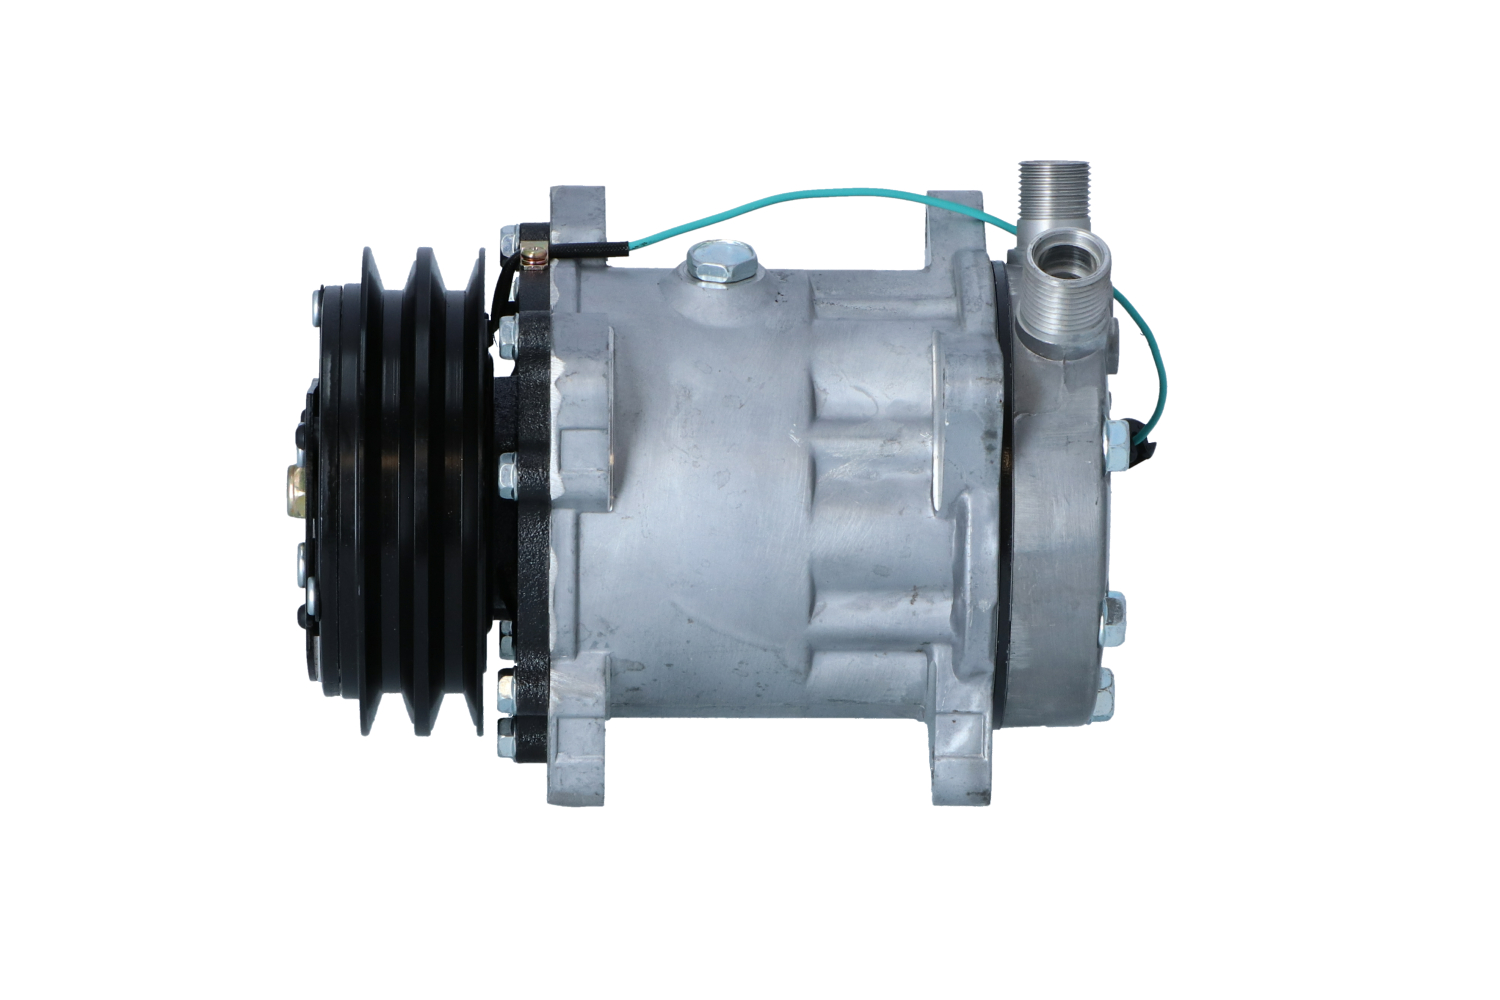 NRF 32873 Air conditioning compressor SD7H15-4652, 24V, PAG 100, with PAG compressor oil, with seal ring